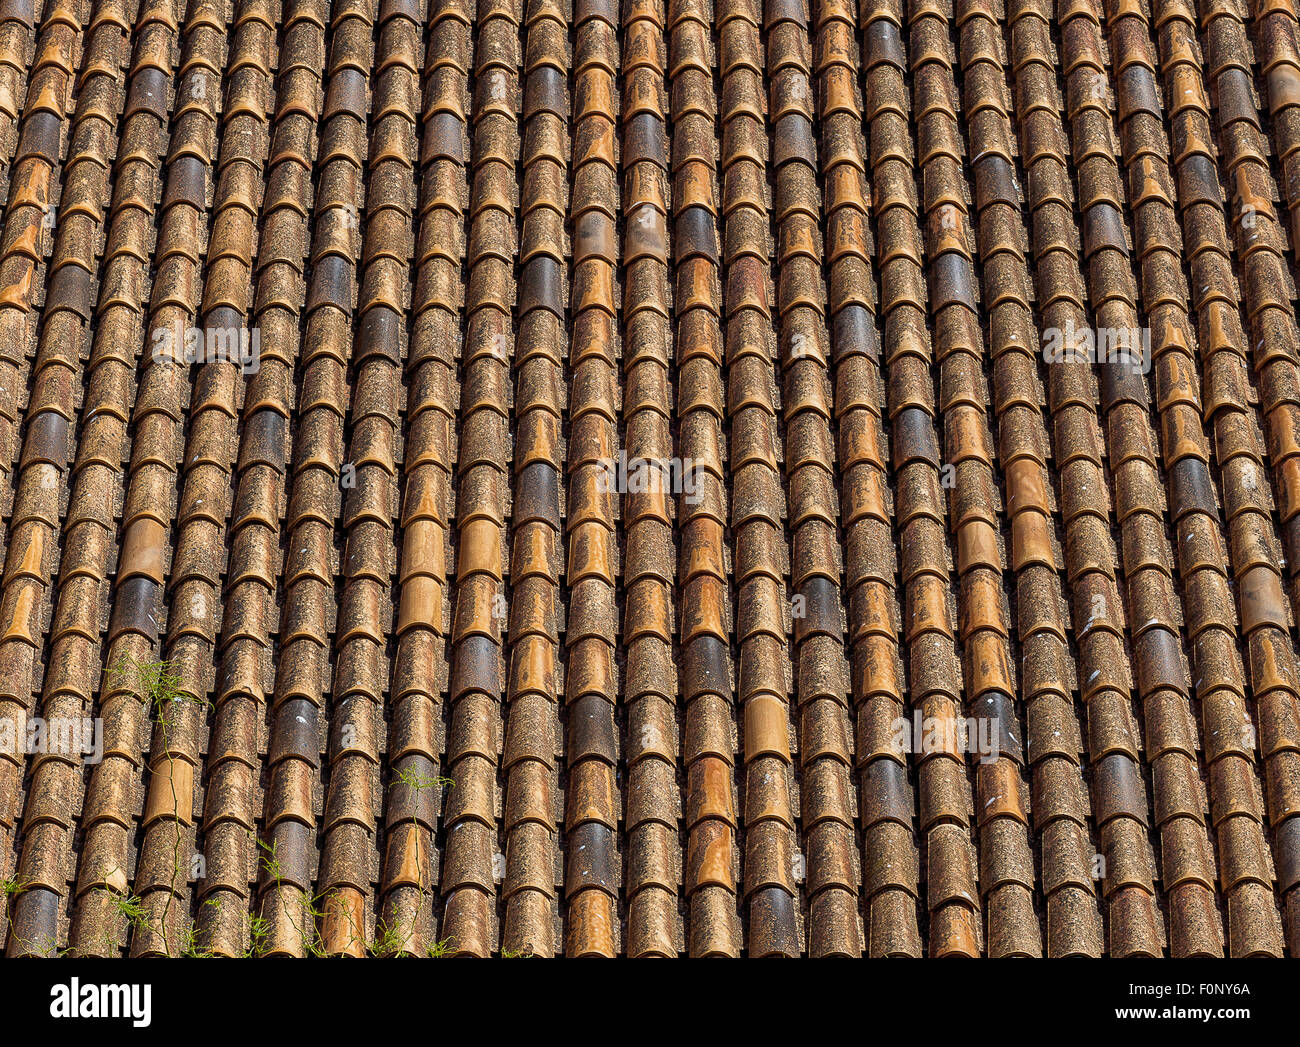 Terracotta Clay Roofing Tiles Stock Photos Terracotta Clay